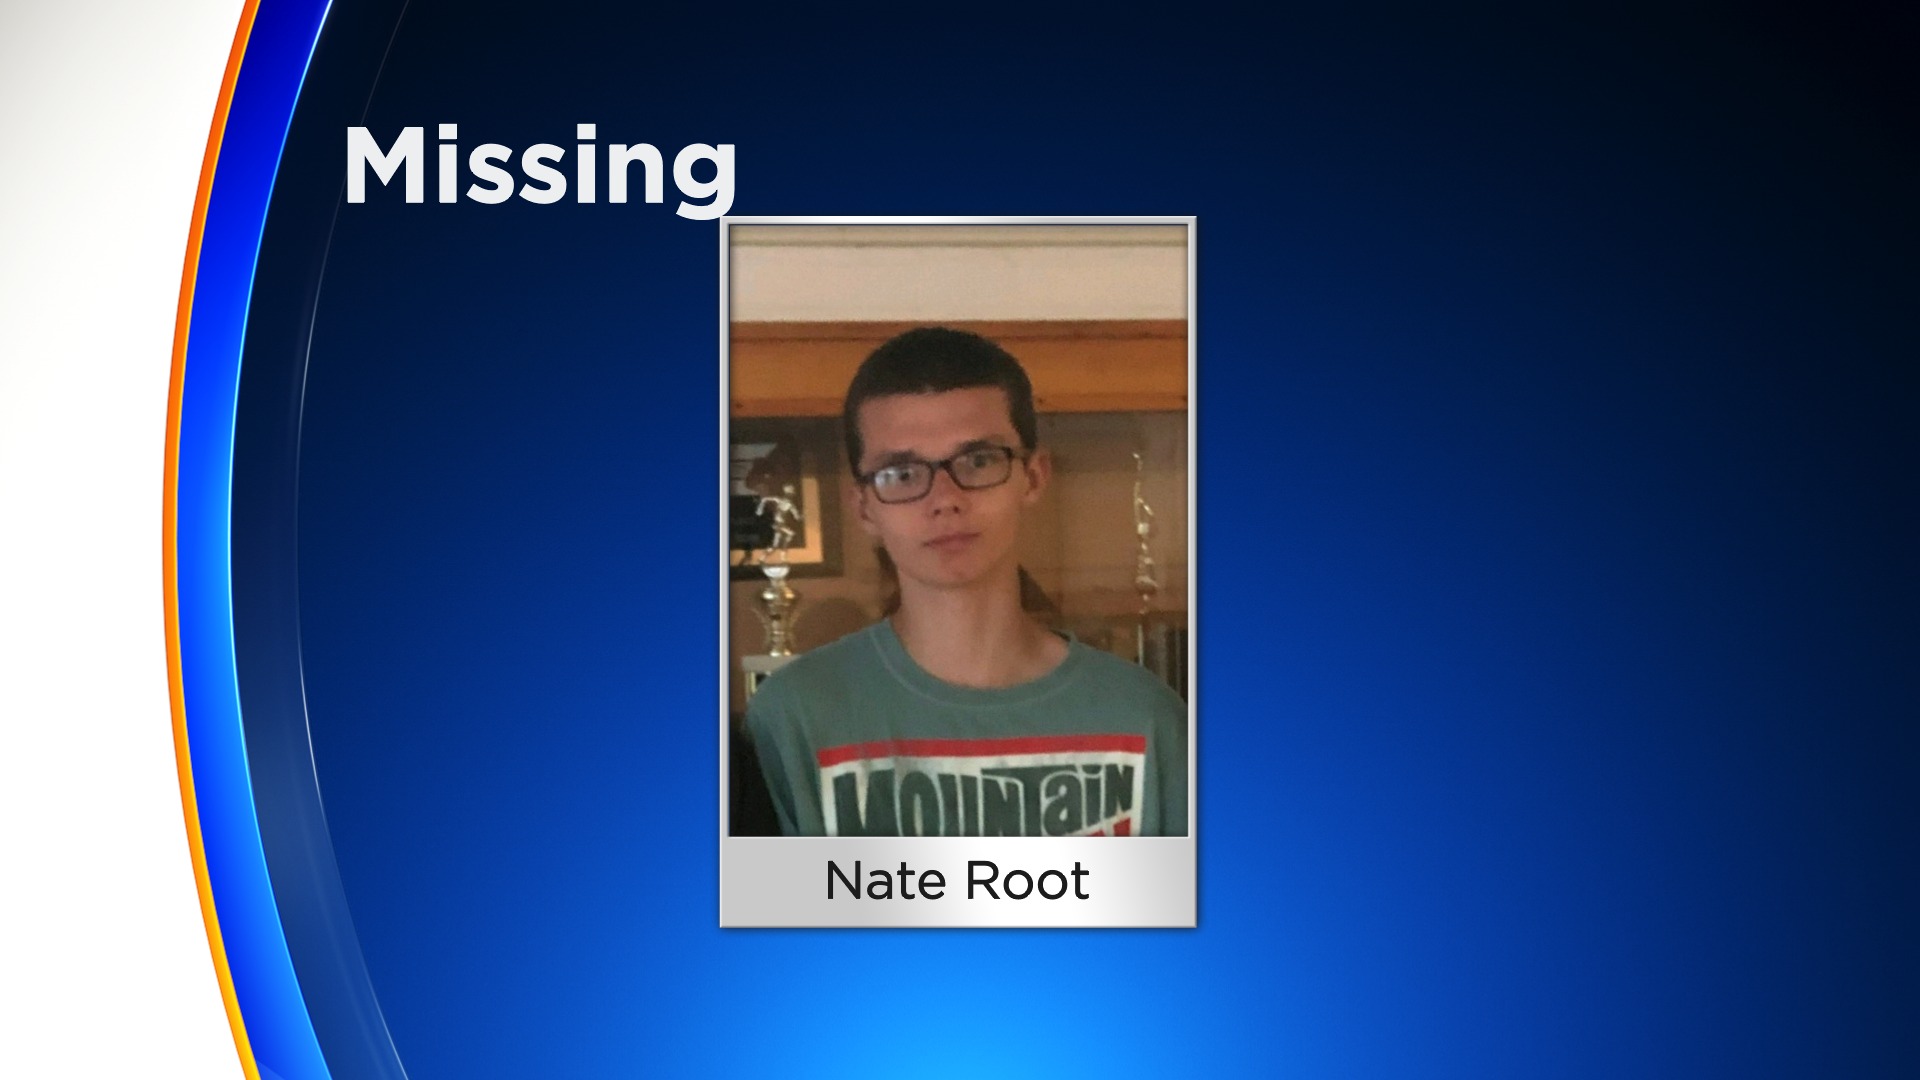 Nate root - missing